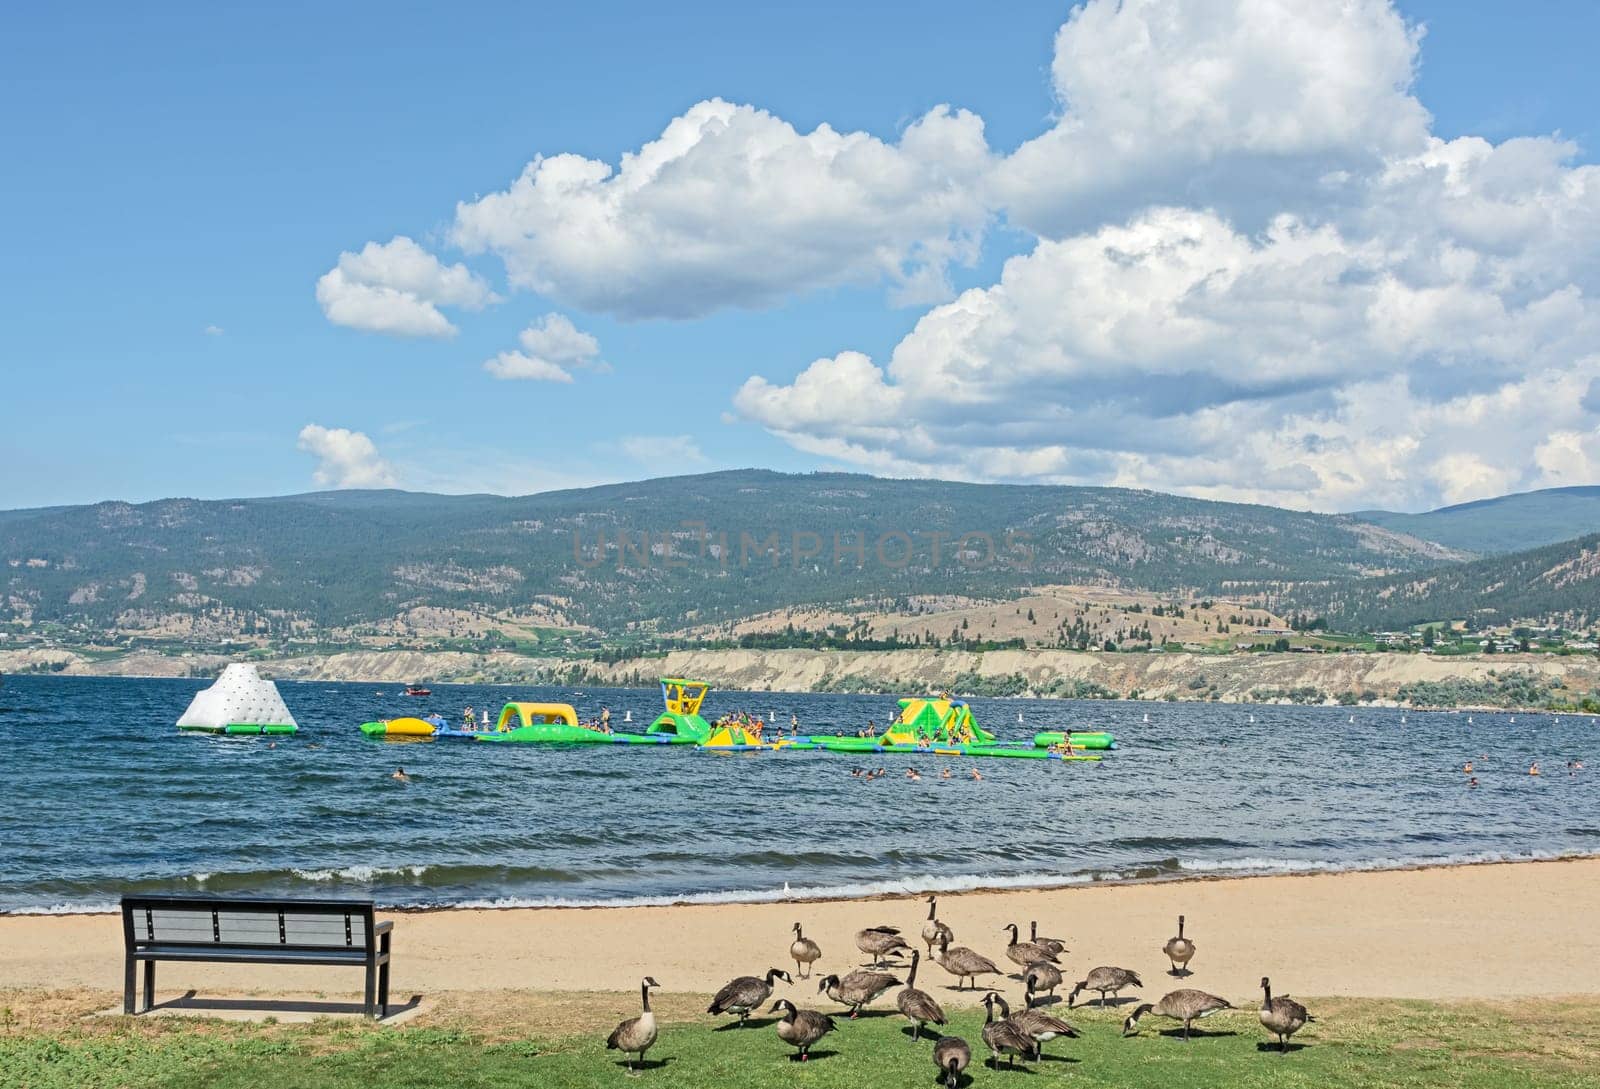 Sand beach and water soaking attraction on Okanagan lake. Recreation area with beautiful overview of a lake and mountains on bright summer day